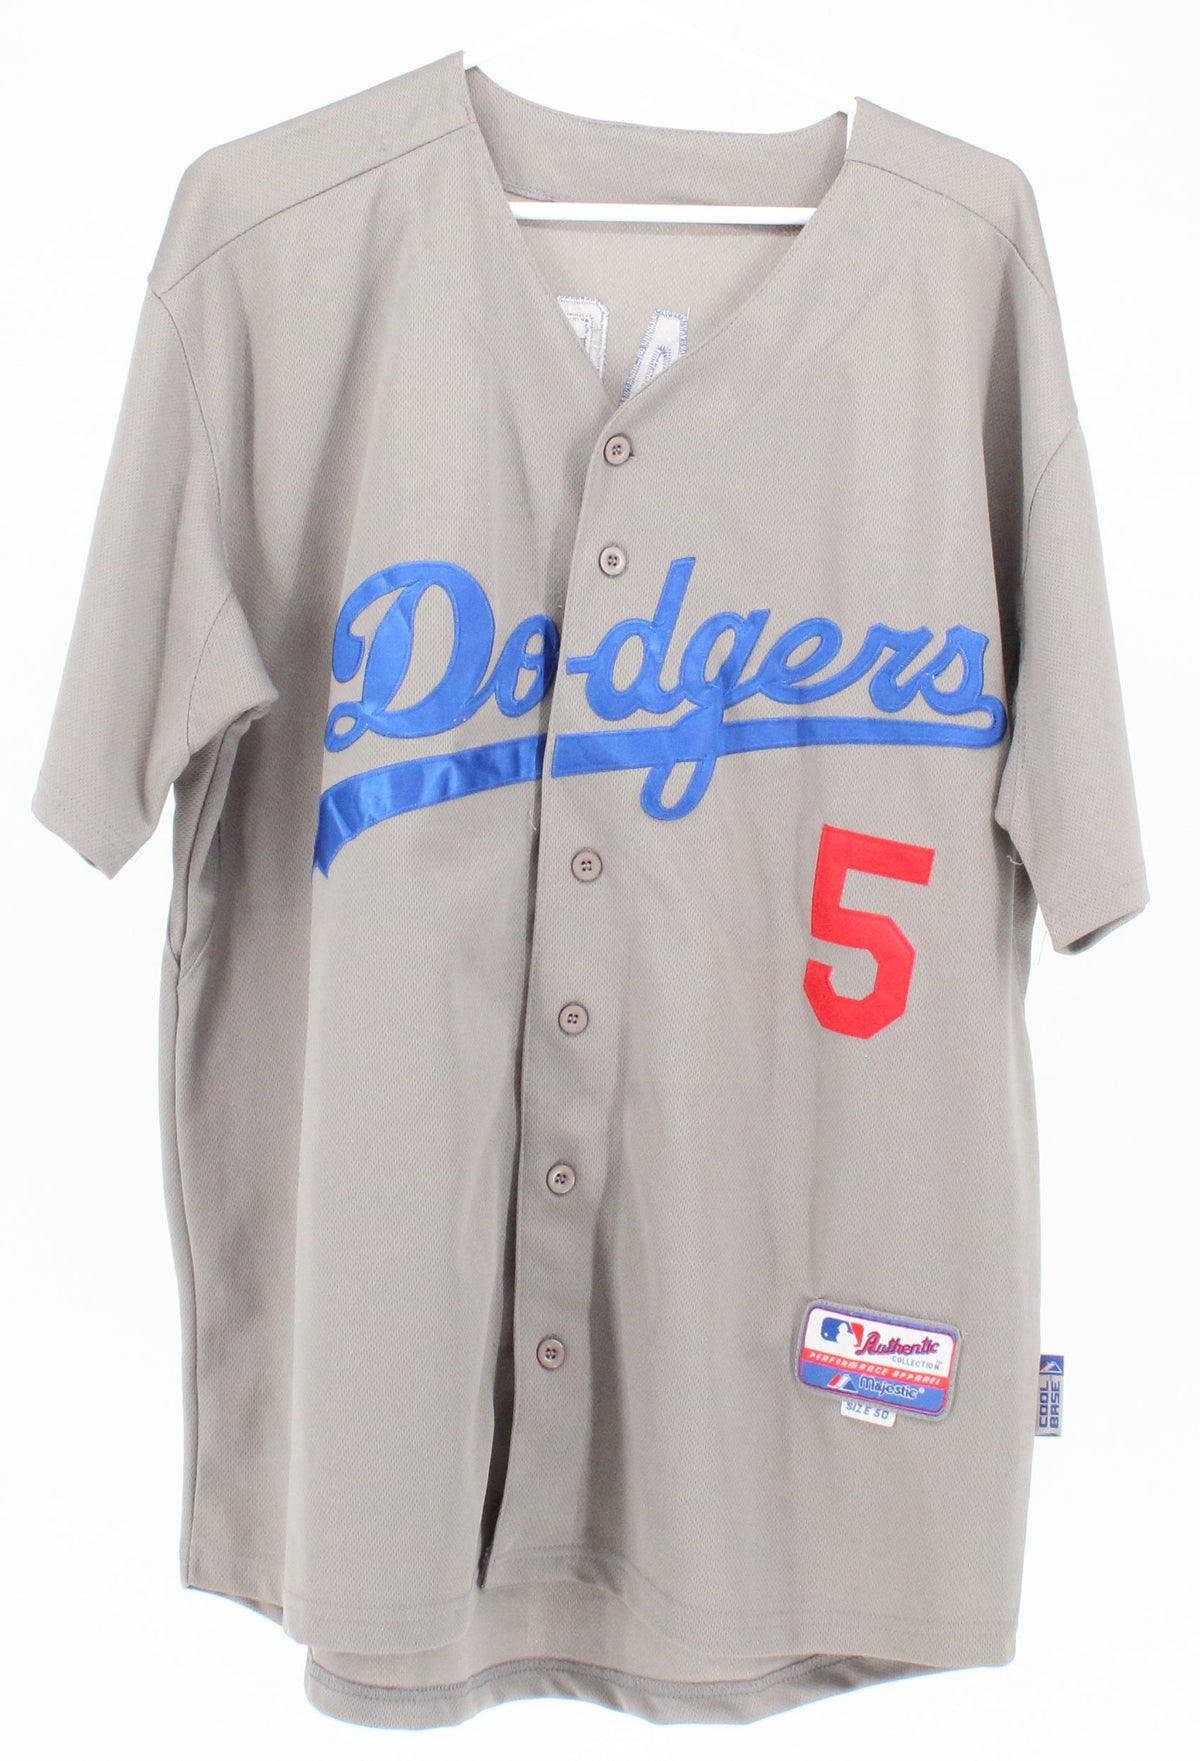 Majestic Gray Front Dodgers 5 Logo & Back Seager 5 Logo MLB Jersey